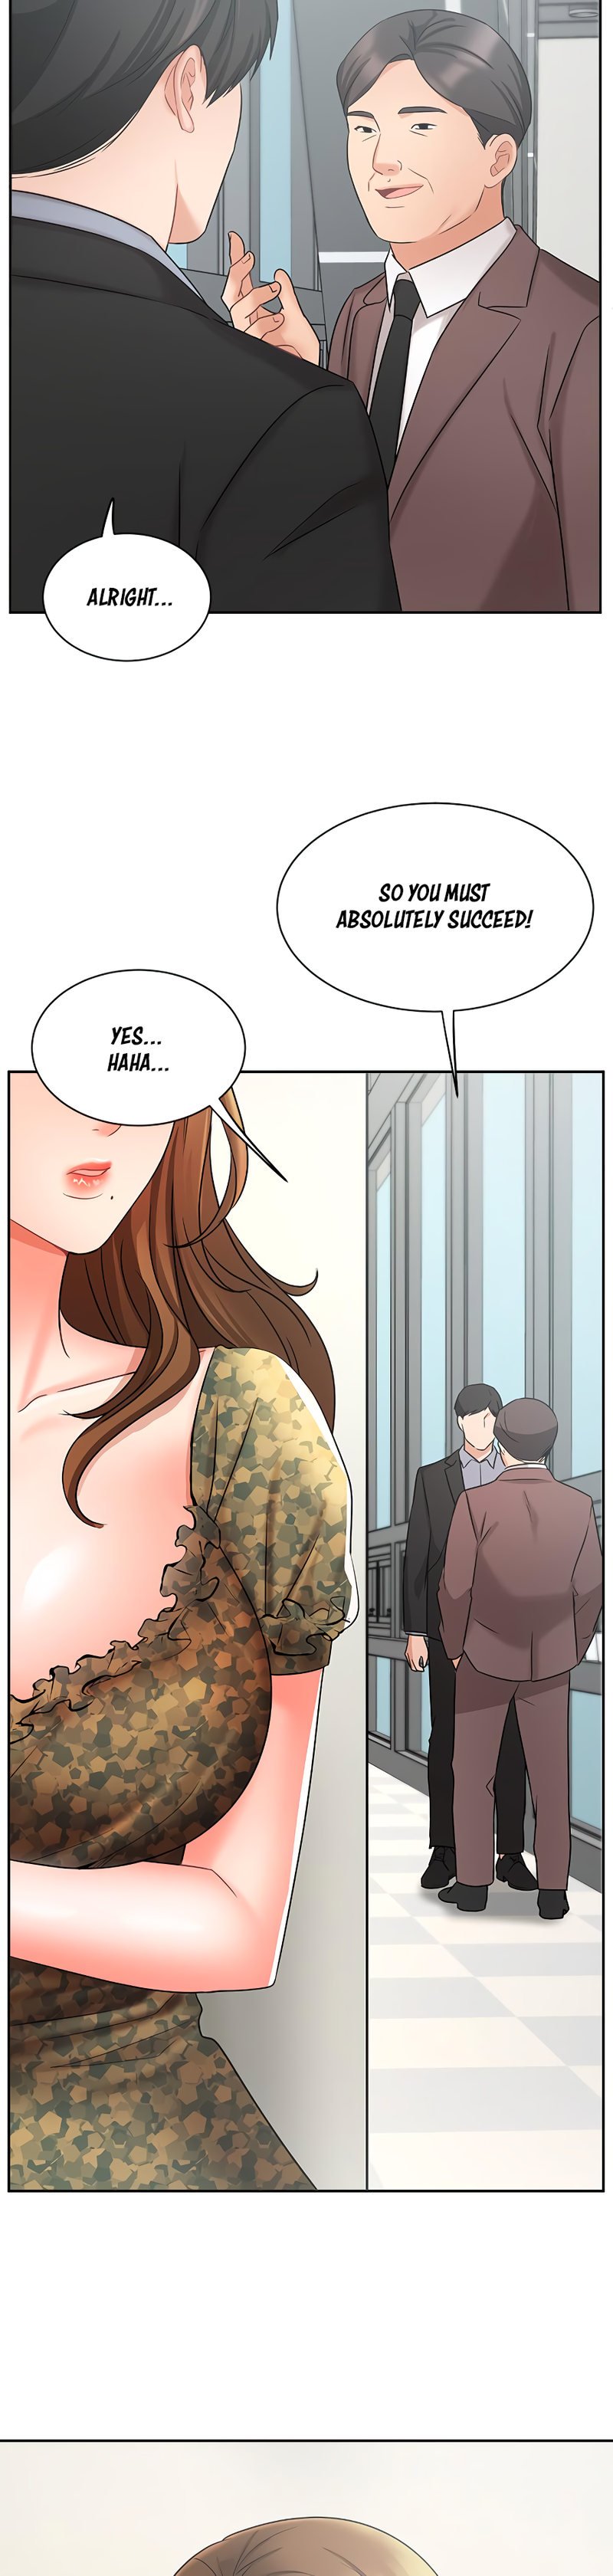 sold-out-girl-chap-38-22